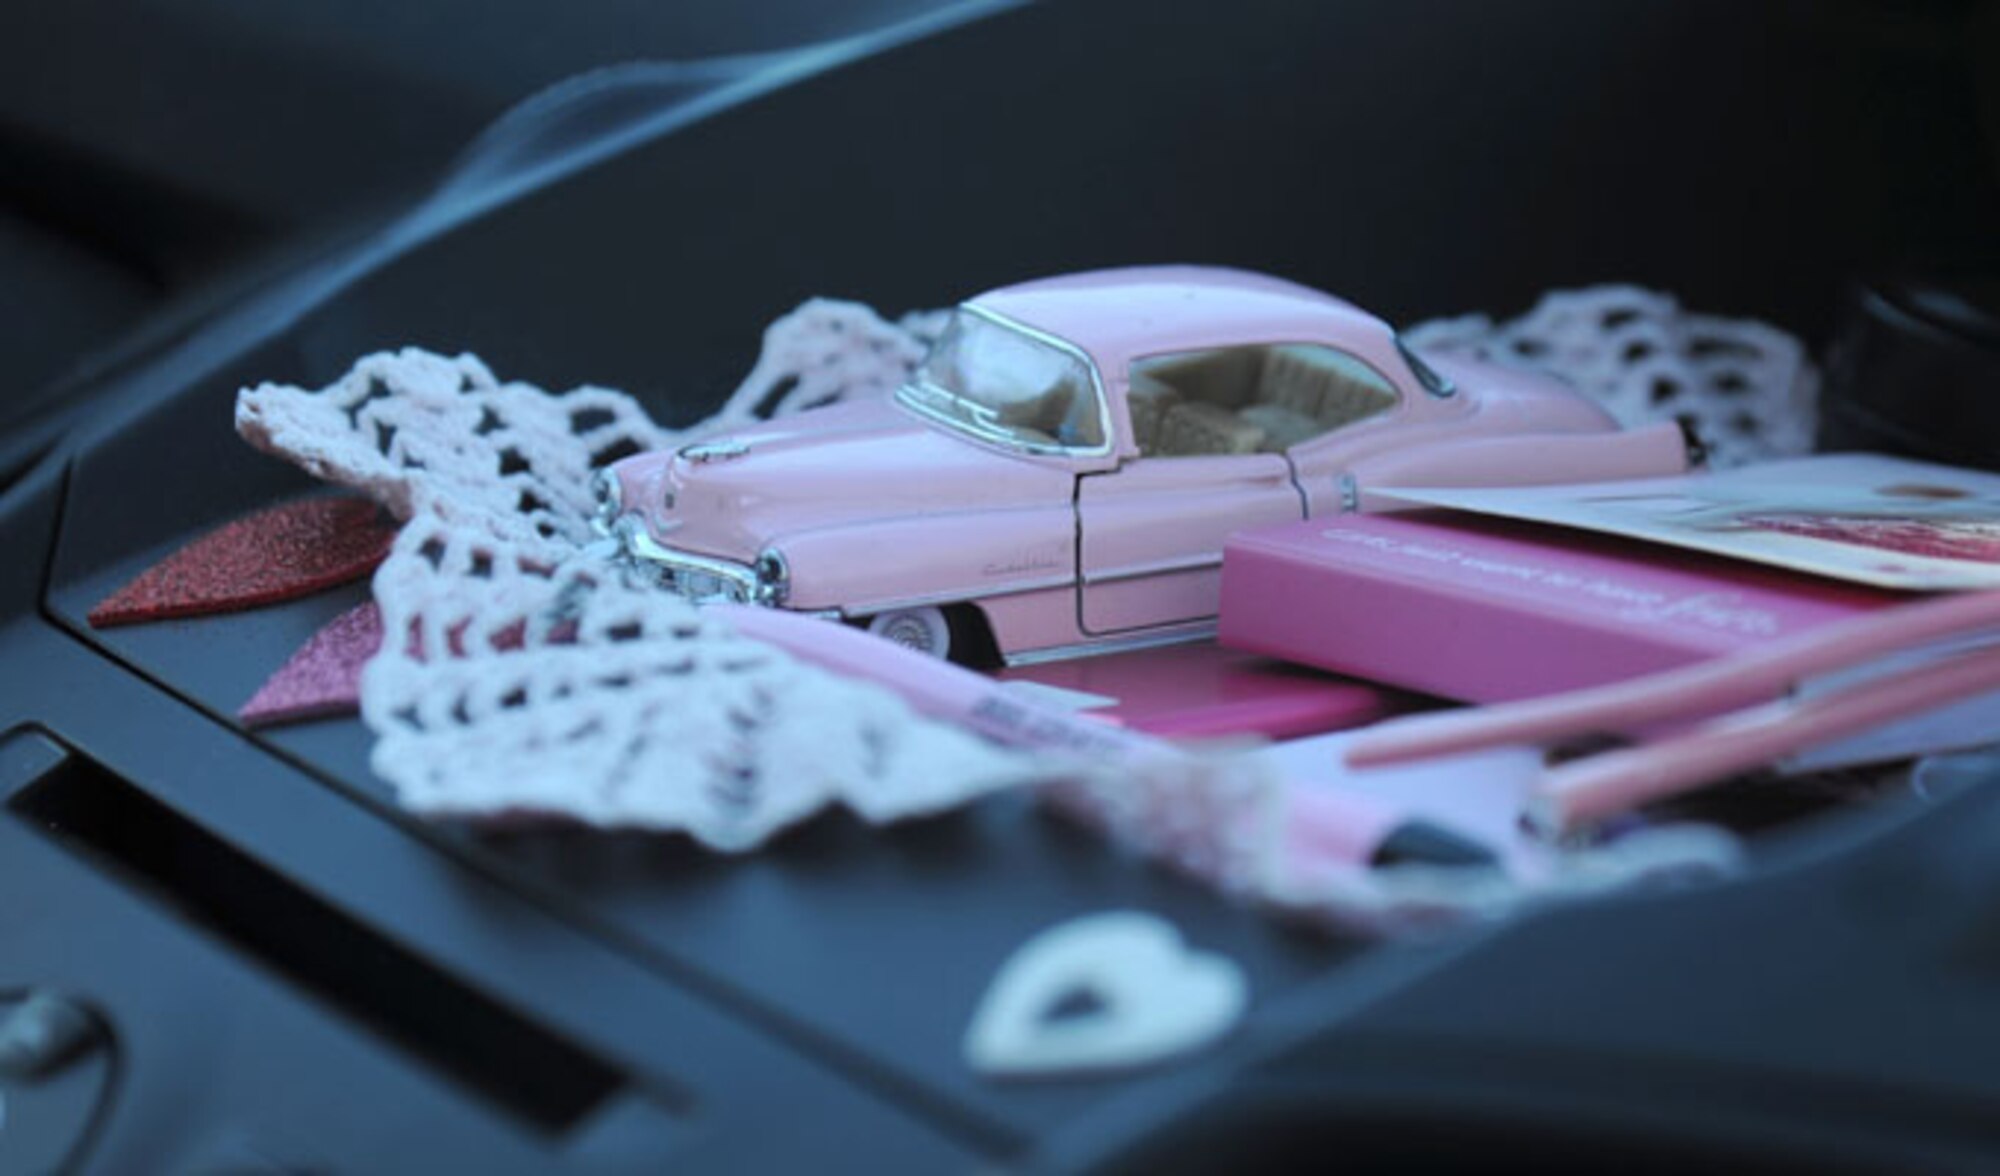 A model vehicle sits on the dashboard of the pink vehicle driven by Alison Miller as she stops for a short break at the Keesler Air Force Base camp site Jan. 16, 2014. Miller is the widow of retired Master Sgt. Chuck Dearing who passed away from cancer last year. Prior to the death of her husband, Miller told him that her intent was to continue traveling in a pink painted car so that he could find her while out on the road. (U.S. Air Force photo/Kemberly Groue)